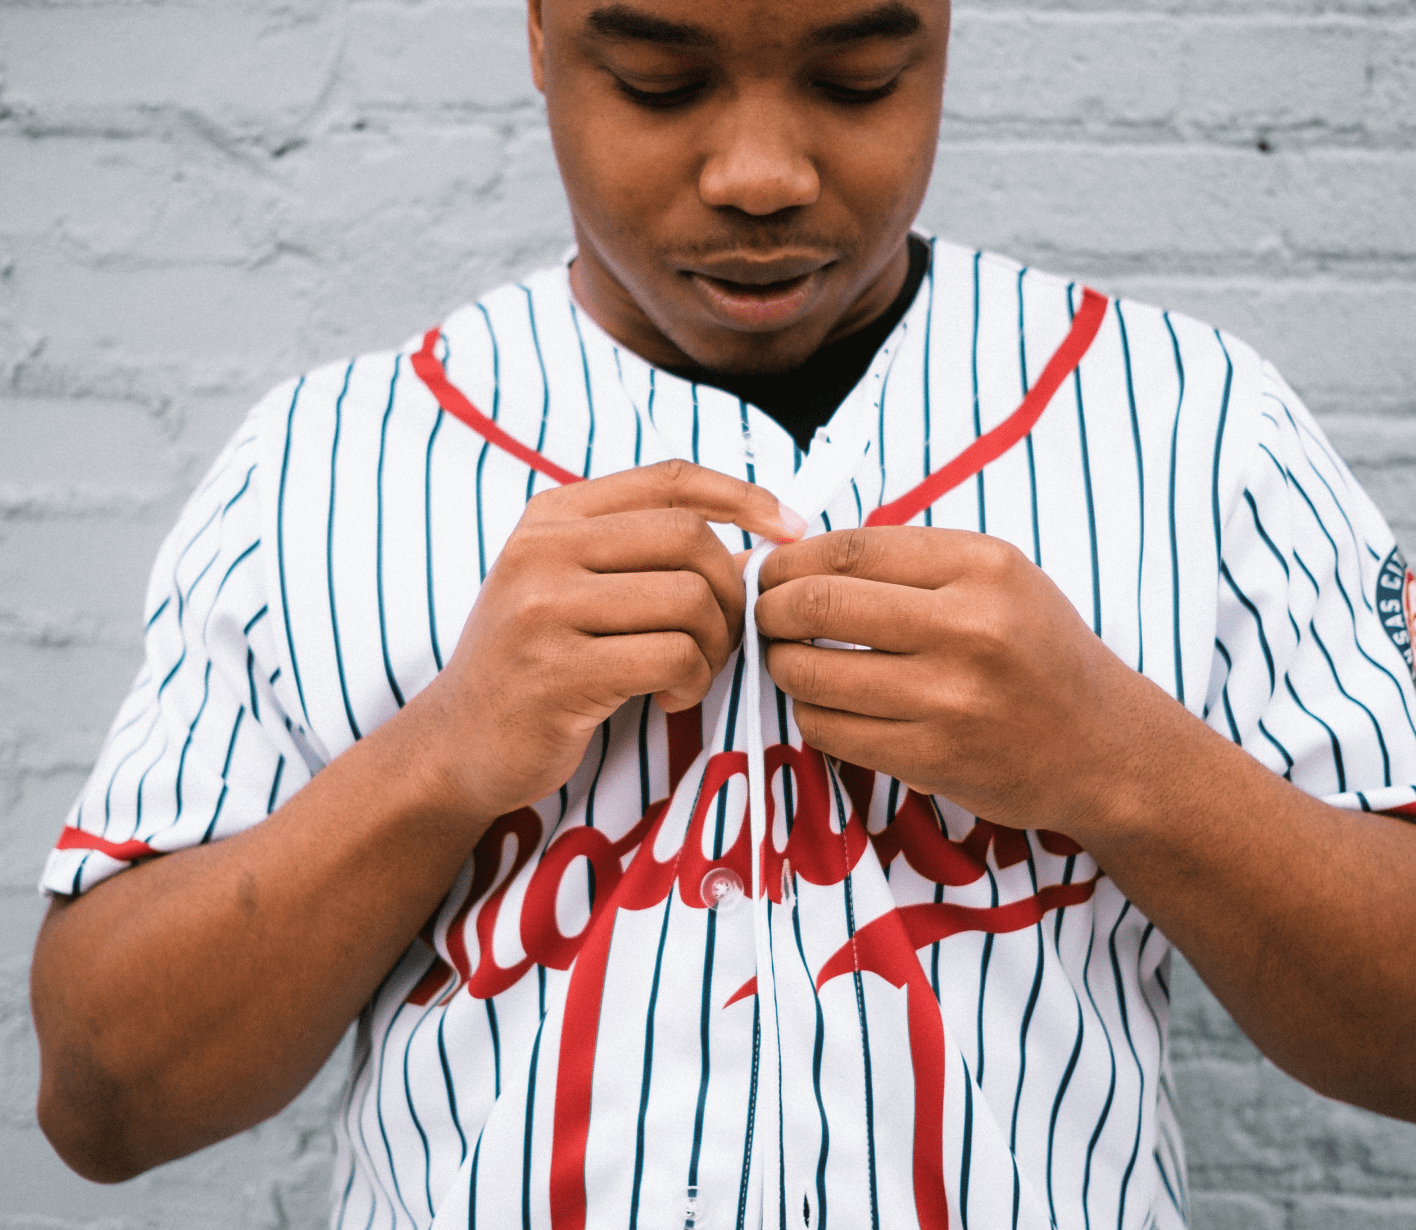 Our favorite pieces from the Kansas City Monarchs' apparel collection